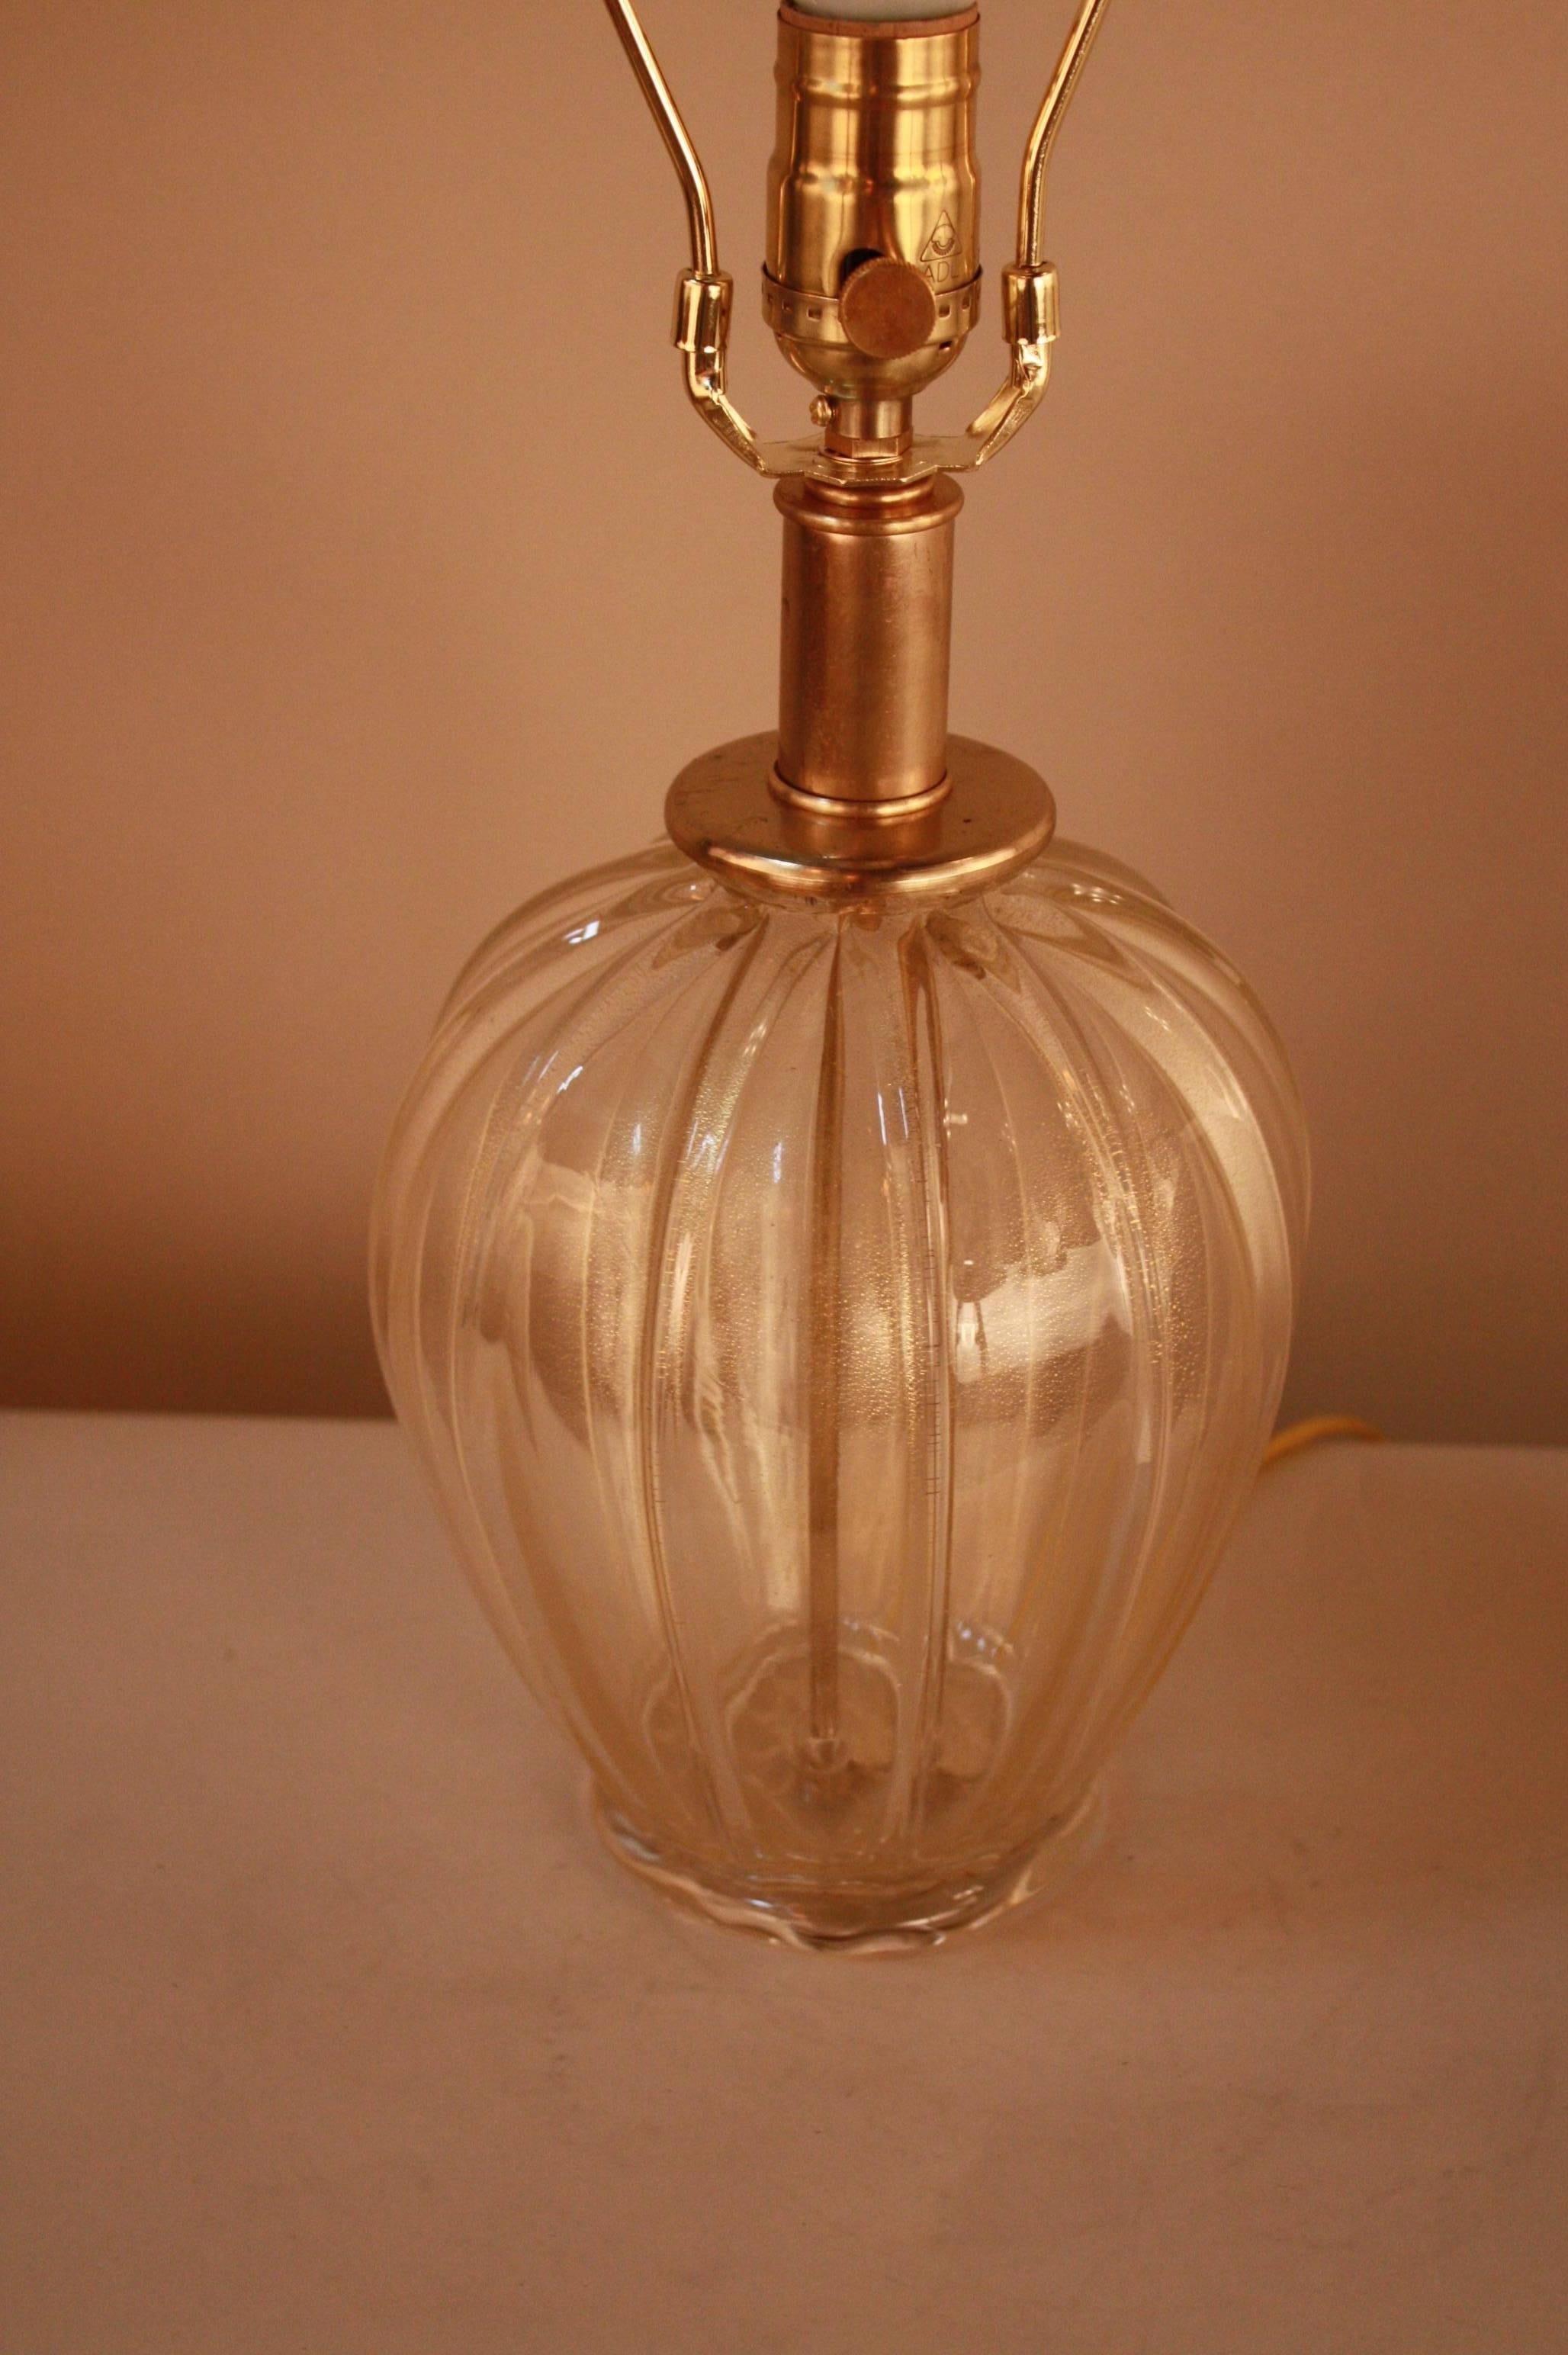 A fantastic petite blown glass lamp in clear with touch of gold by Moreau Freres.
This lamp is fitted with hardback silk lampshade.